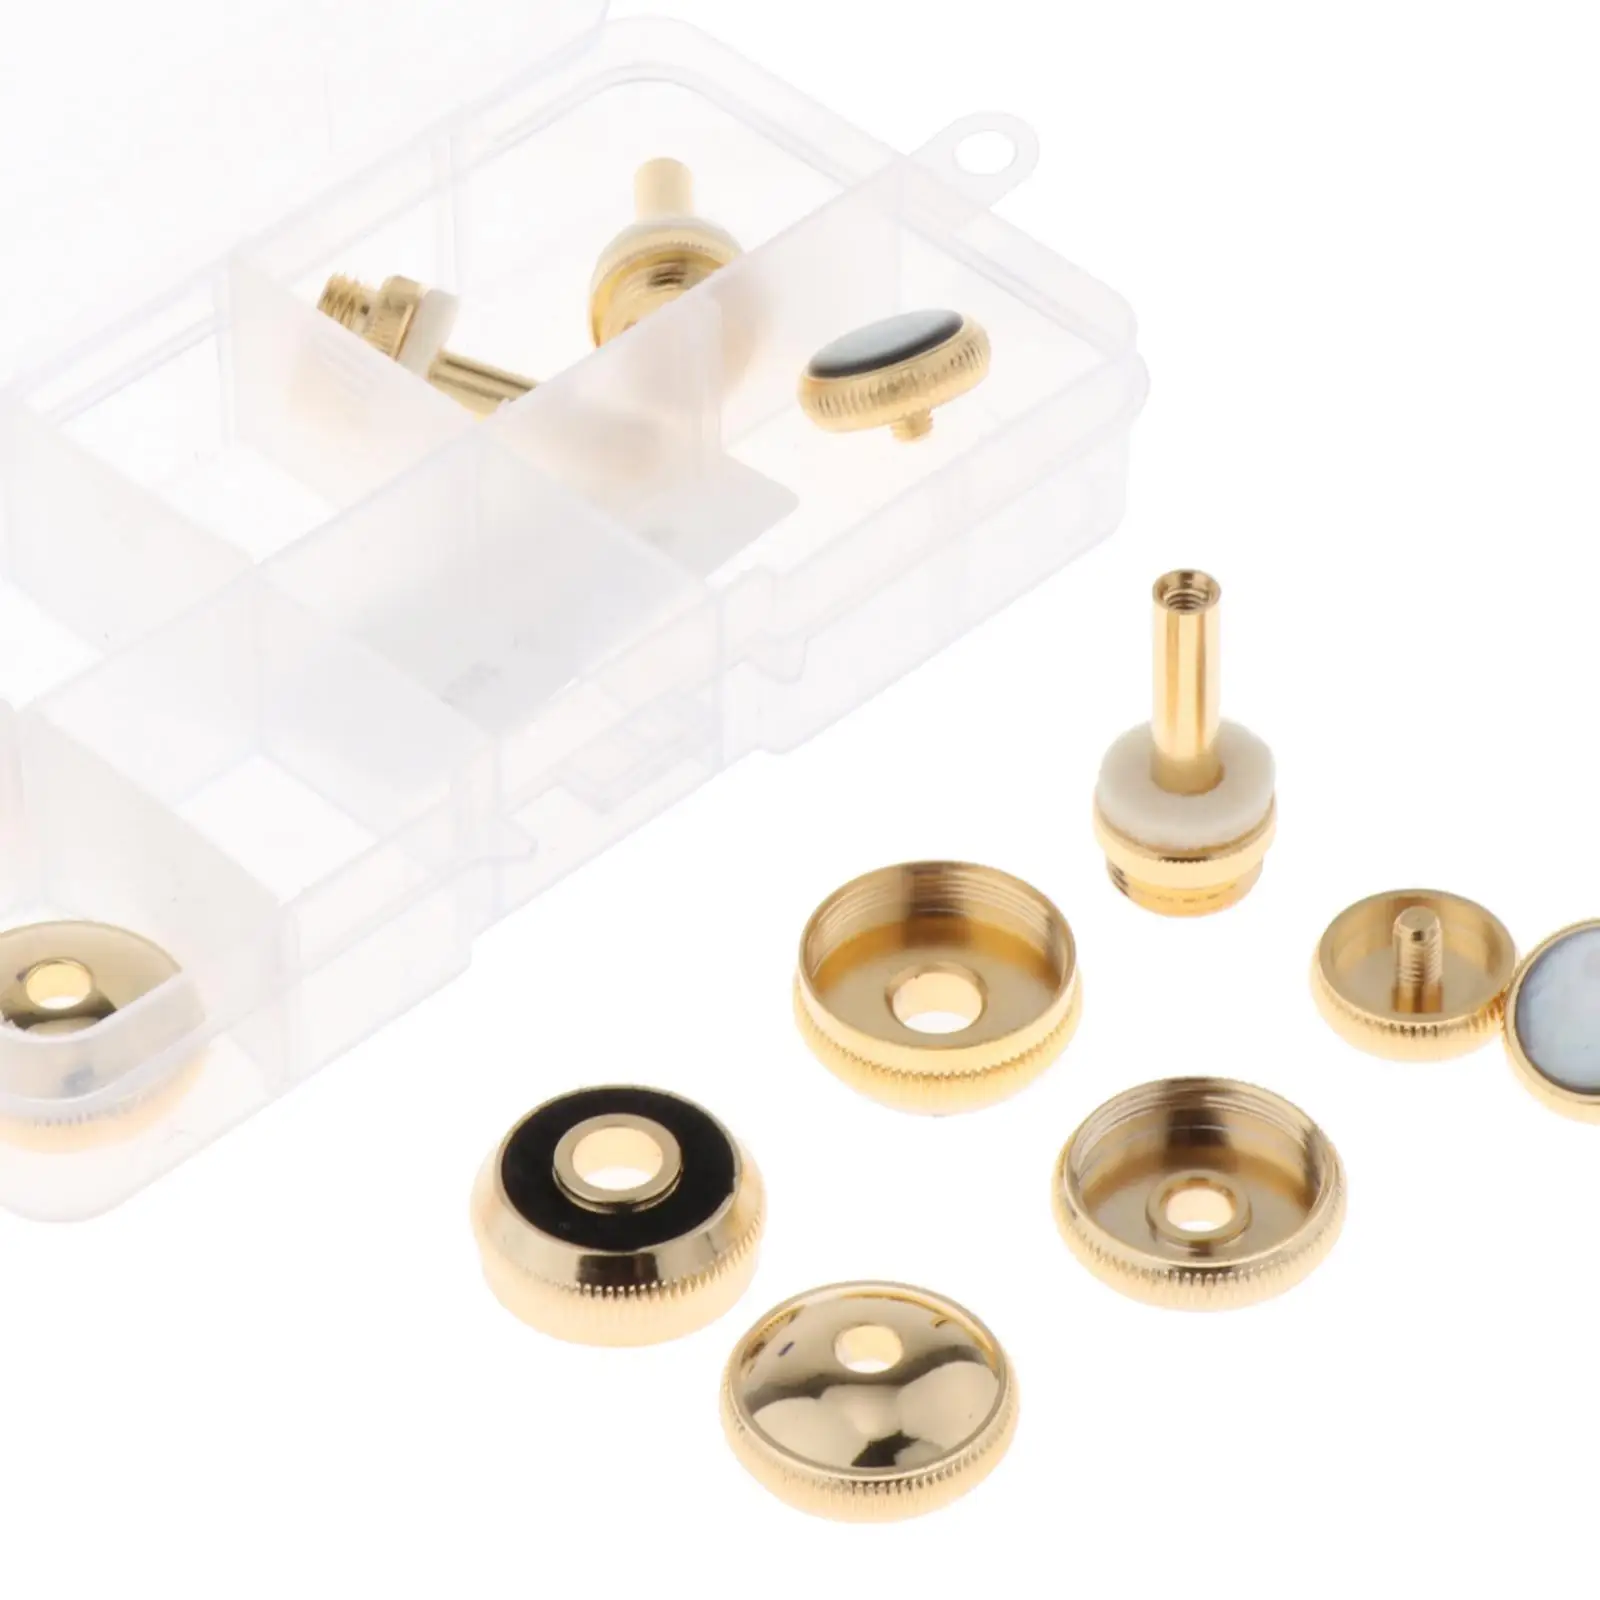 Trumpet Finger Buttons Portable Replacement Parts for Repairing Maintenance